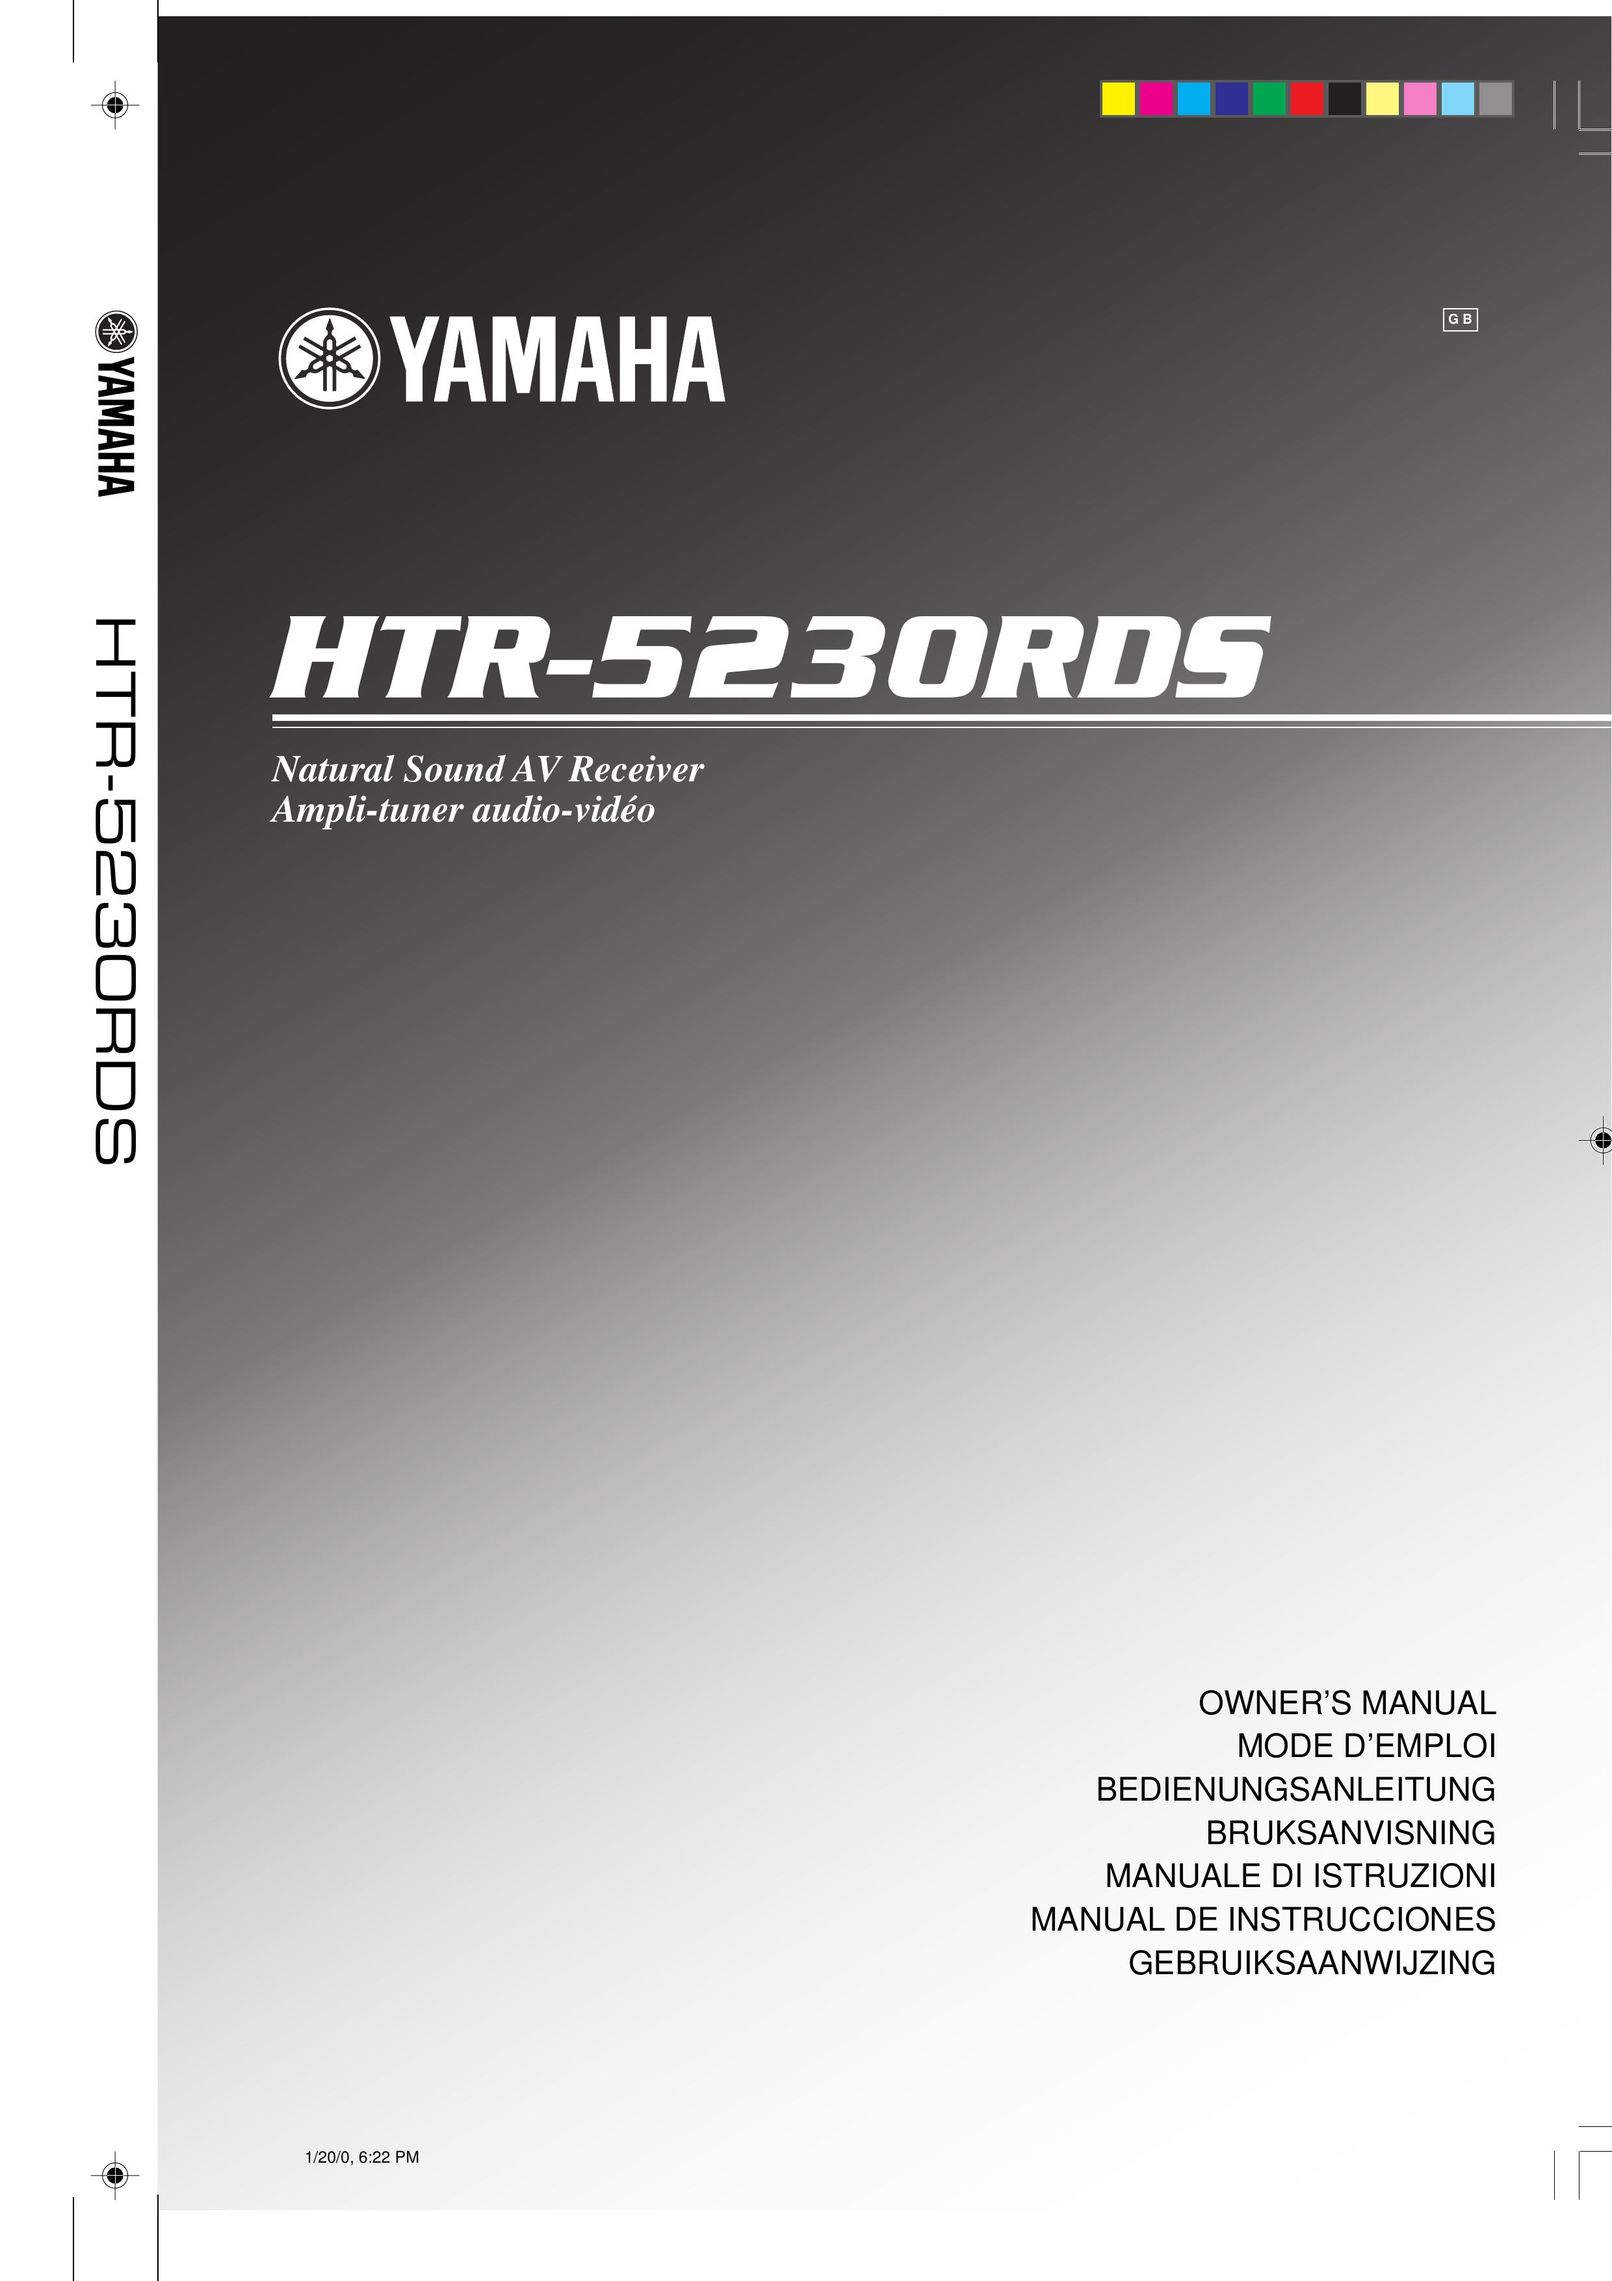 Yamaha HTR-5230RDS Stereo Receiver User Manual